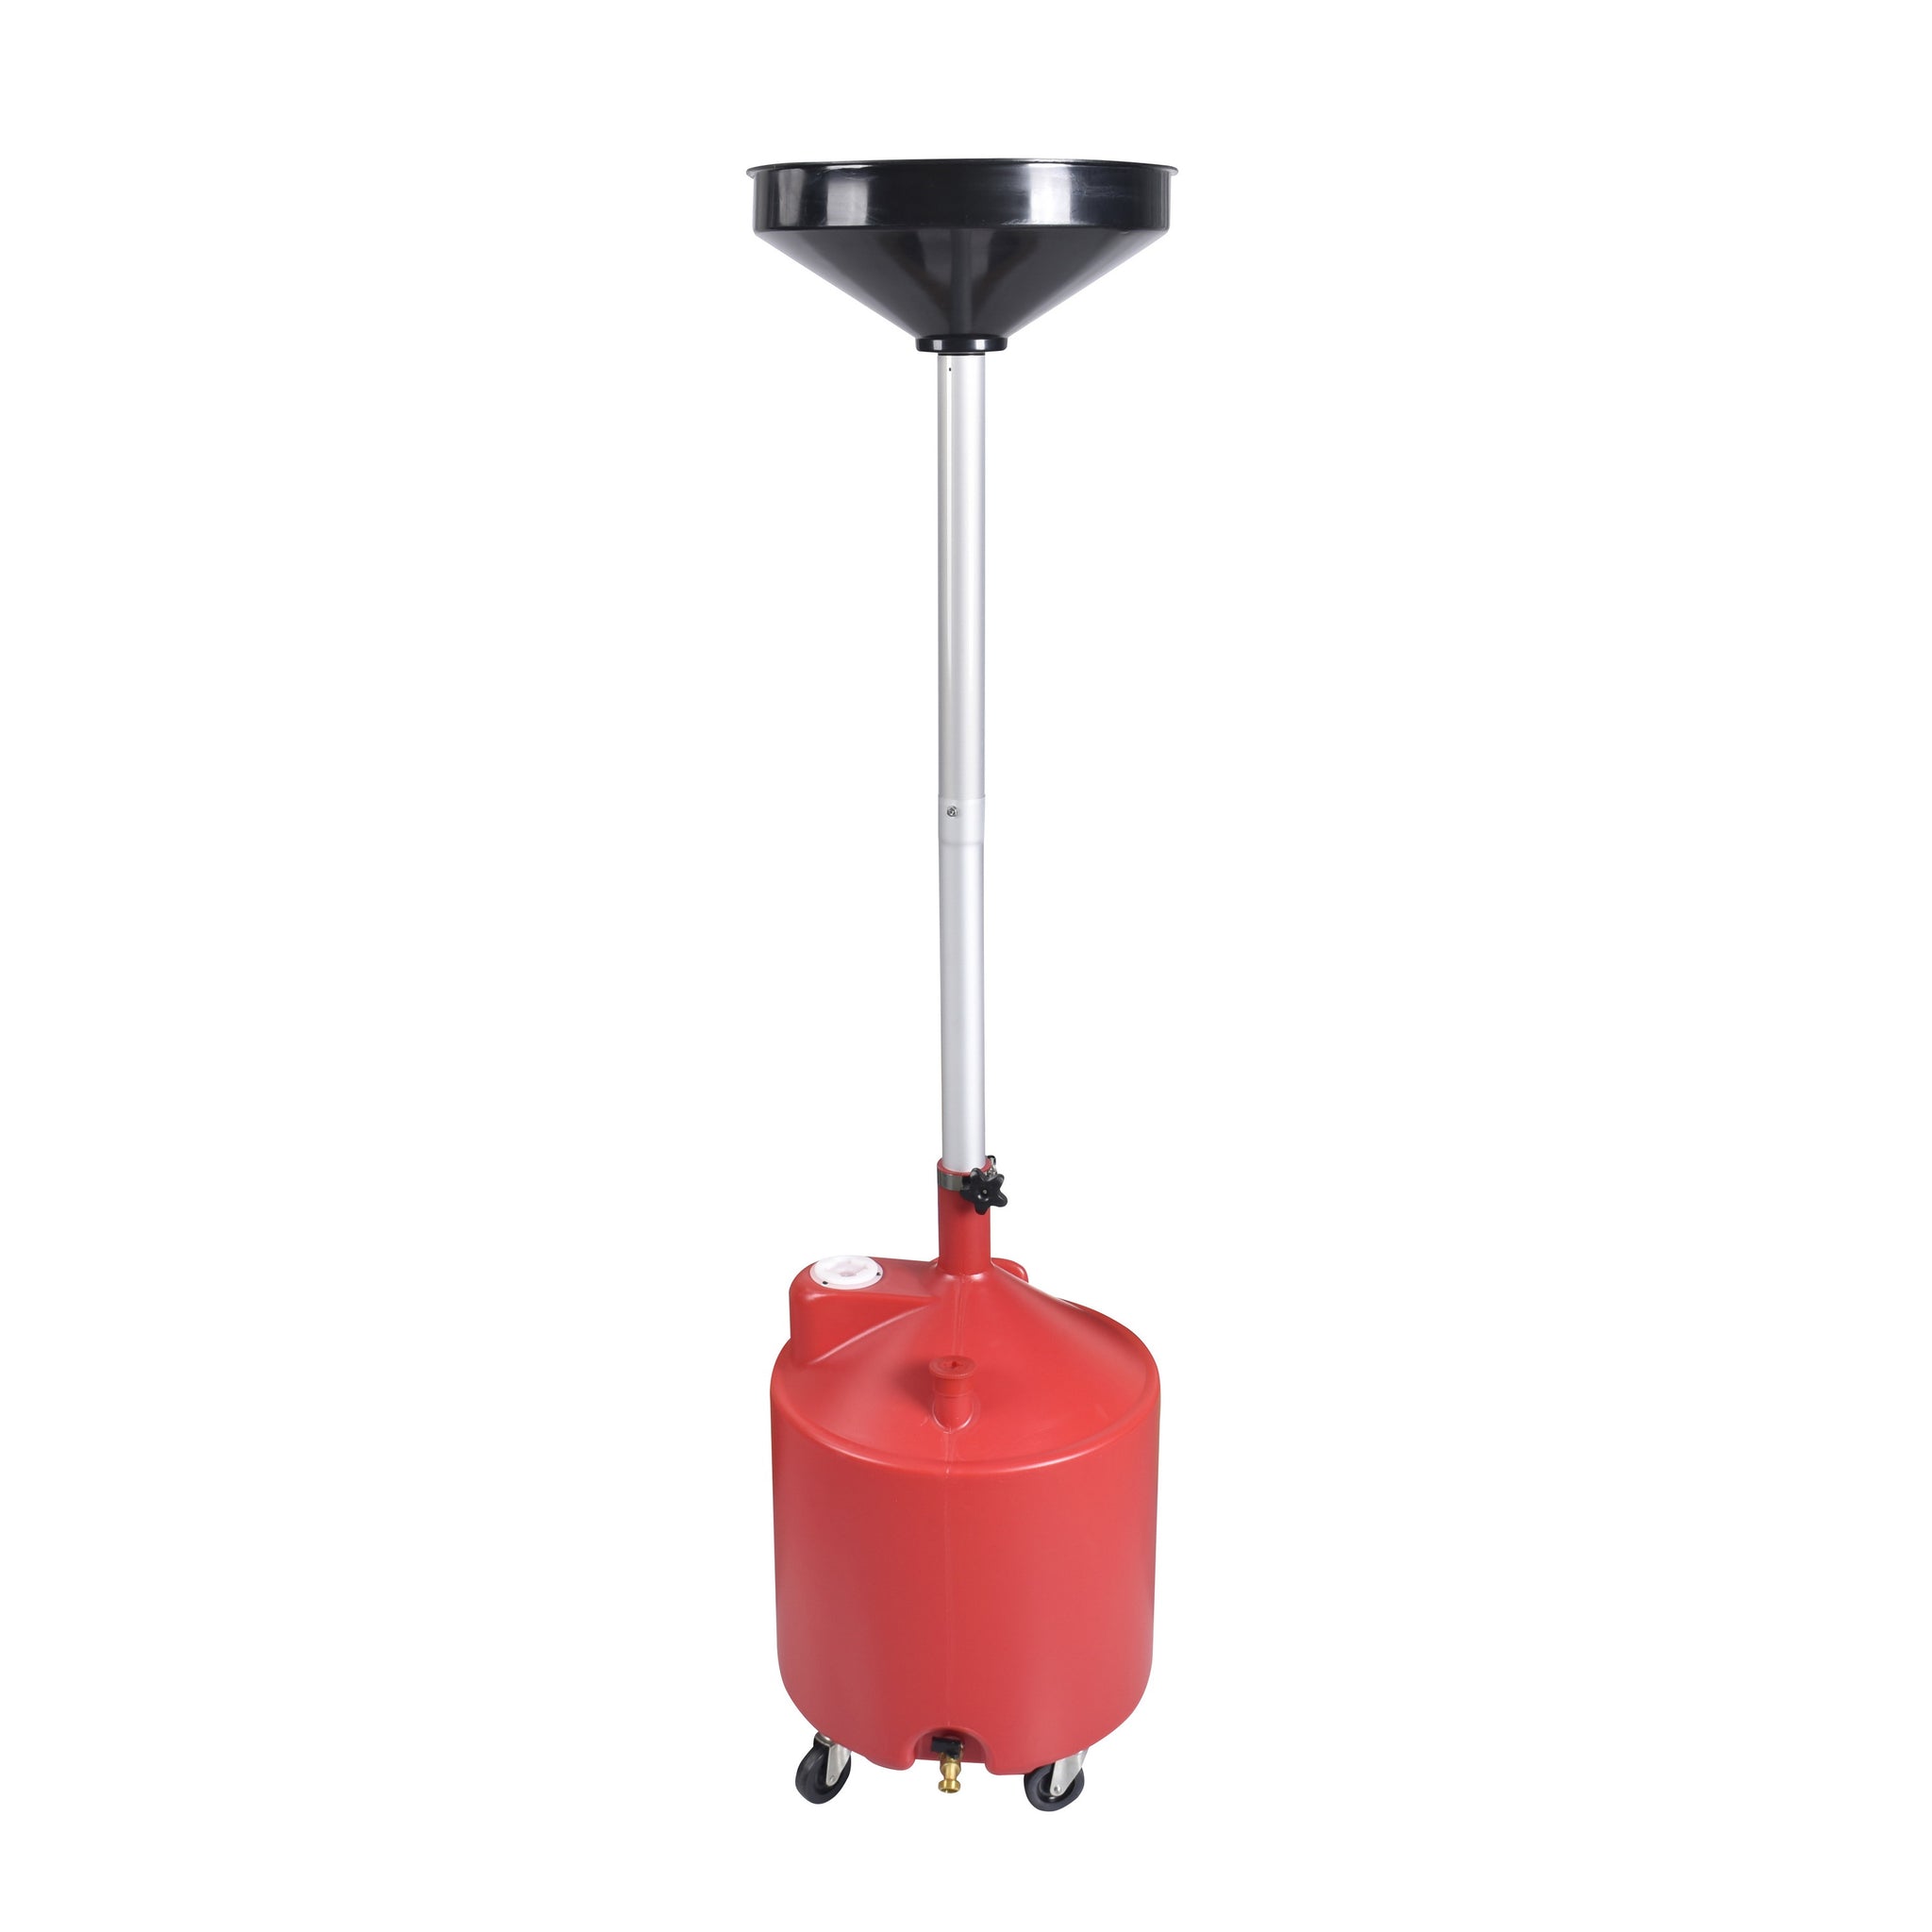 Aain AA046, 18 Gallon Portable Waste Oil Drain, Industrial Fluid Drain Tank with Wheels and Adjustable Funnel Height. Red